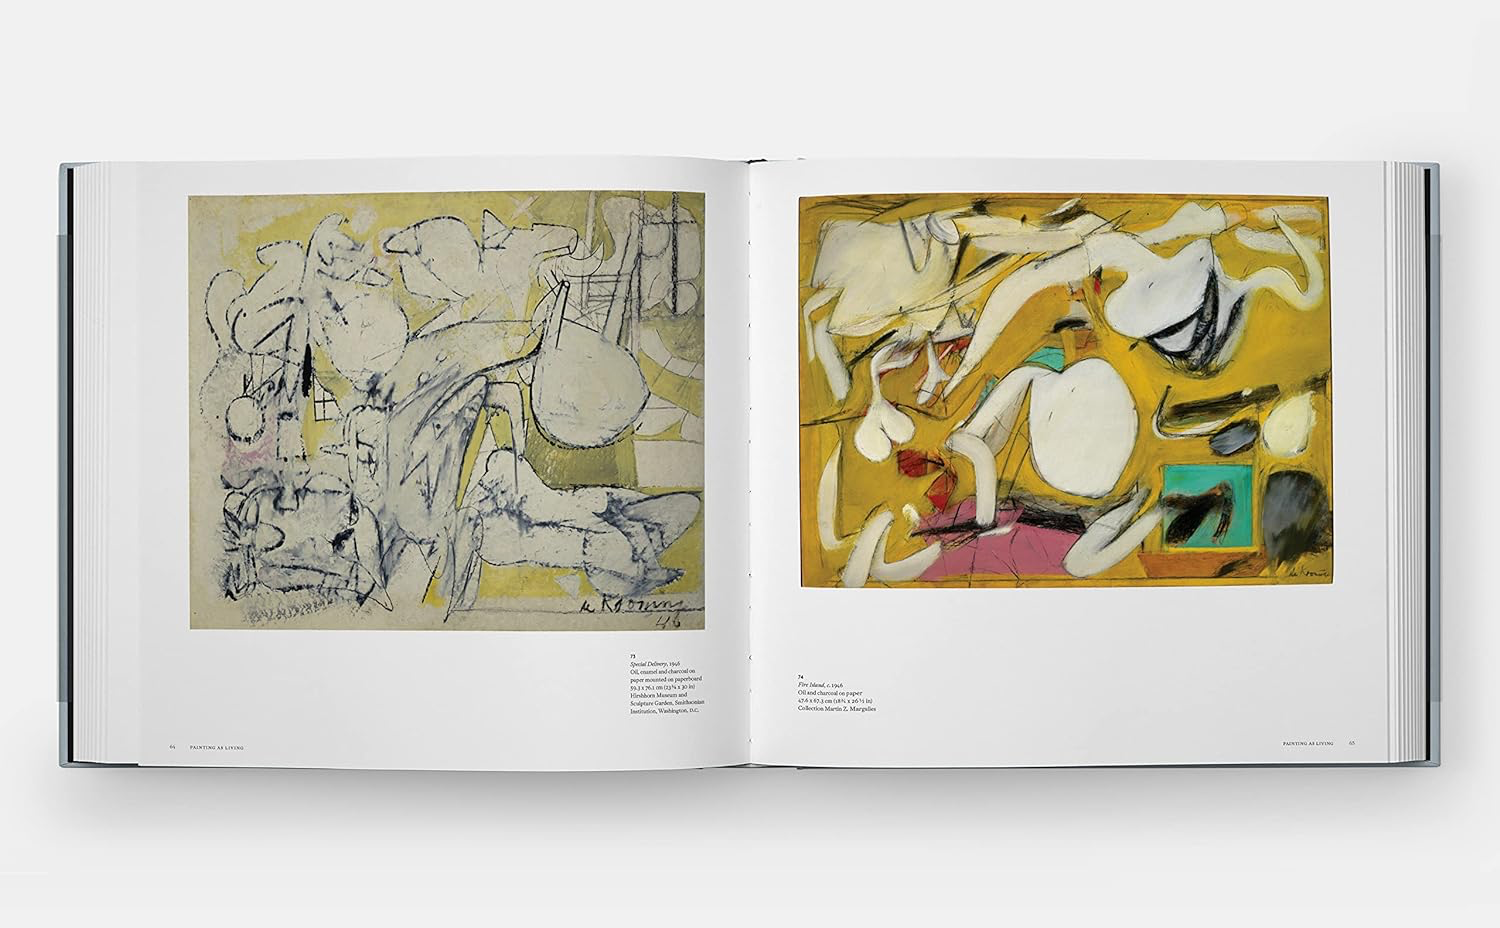 “A Way of Living: The Art of Willem de Kooning” Pages 64 and 65